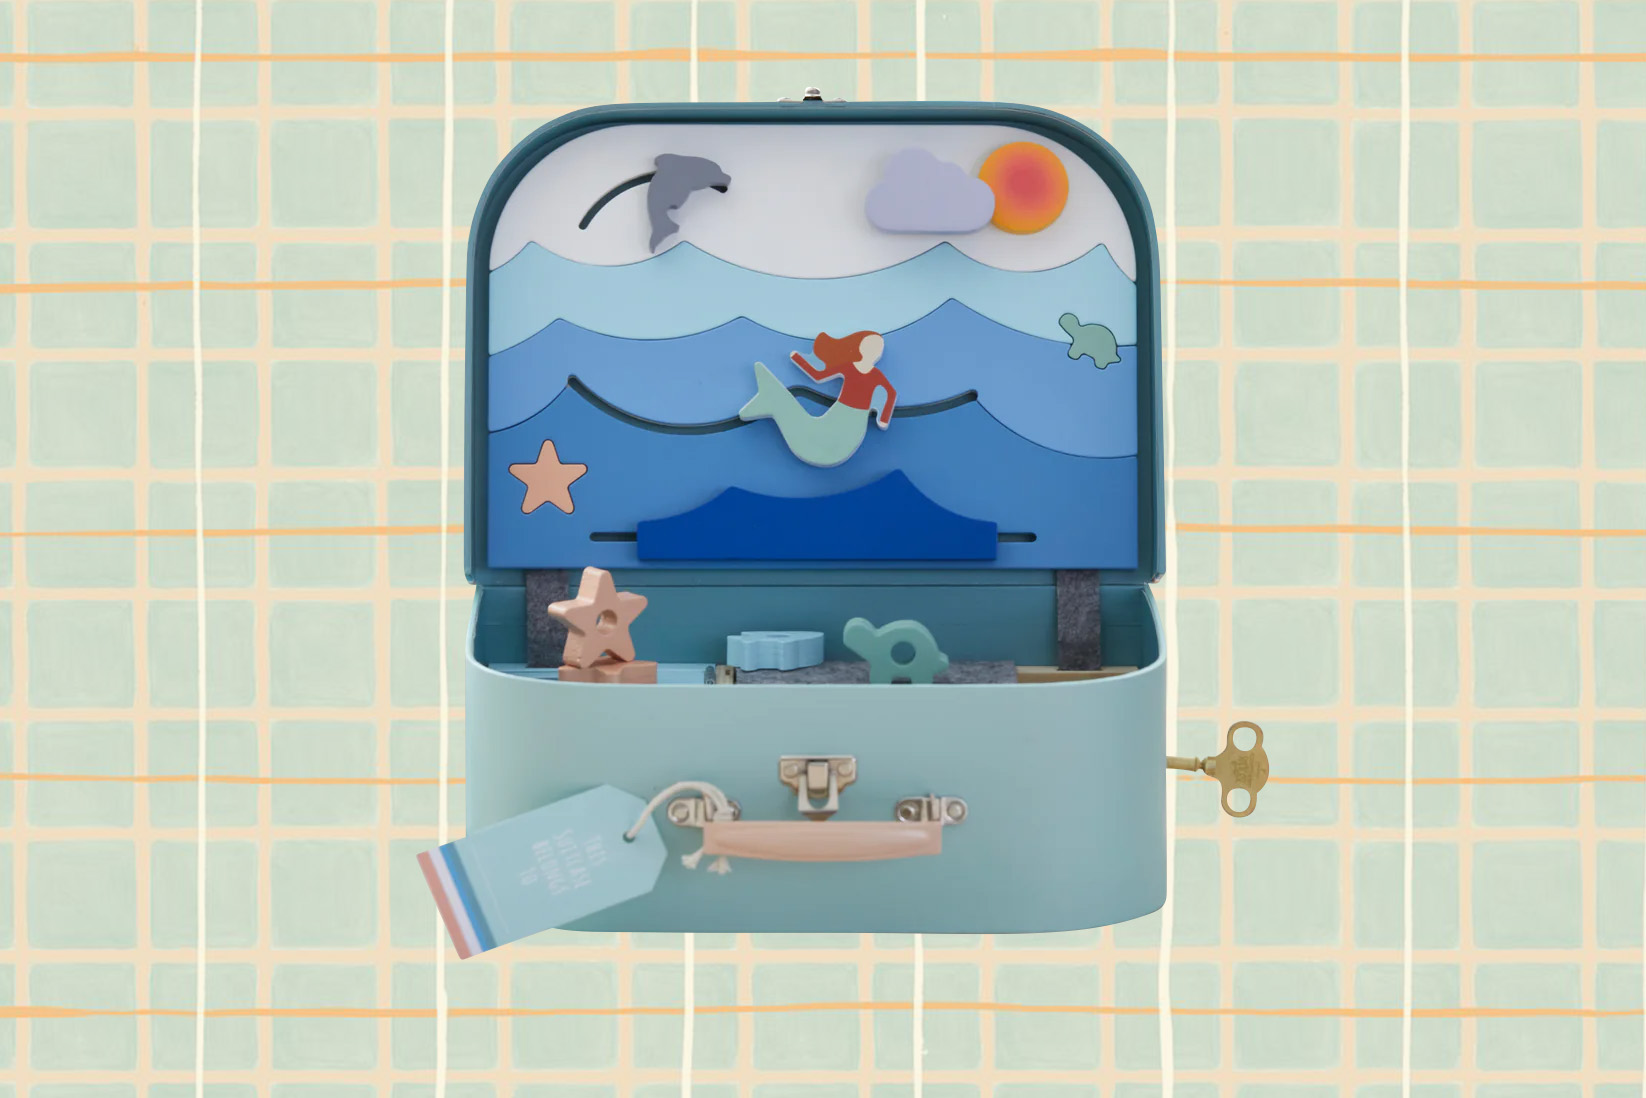 cast your peepers over to this adorable toy suitcase • design • frankie ...